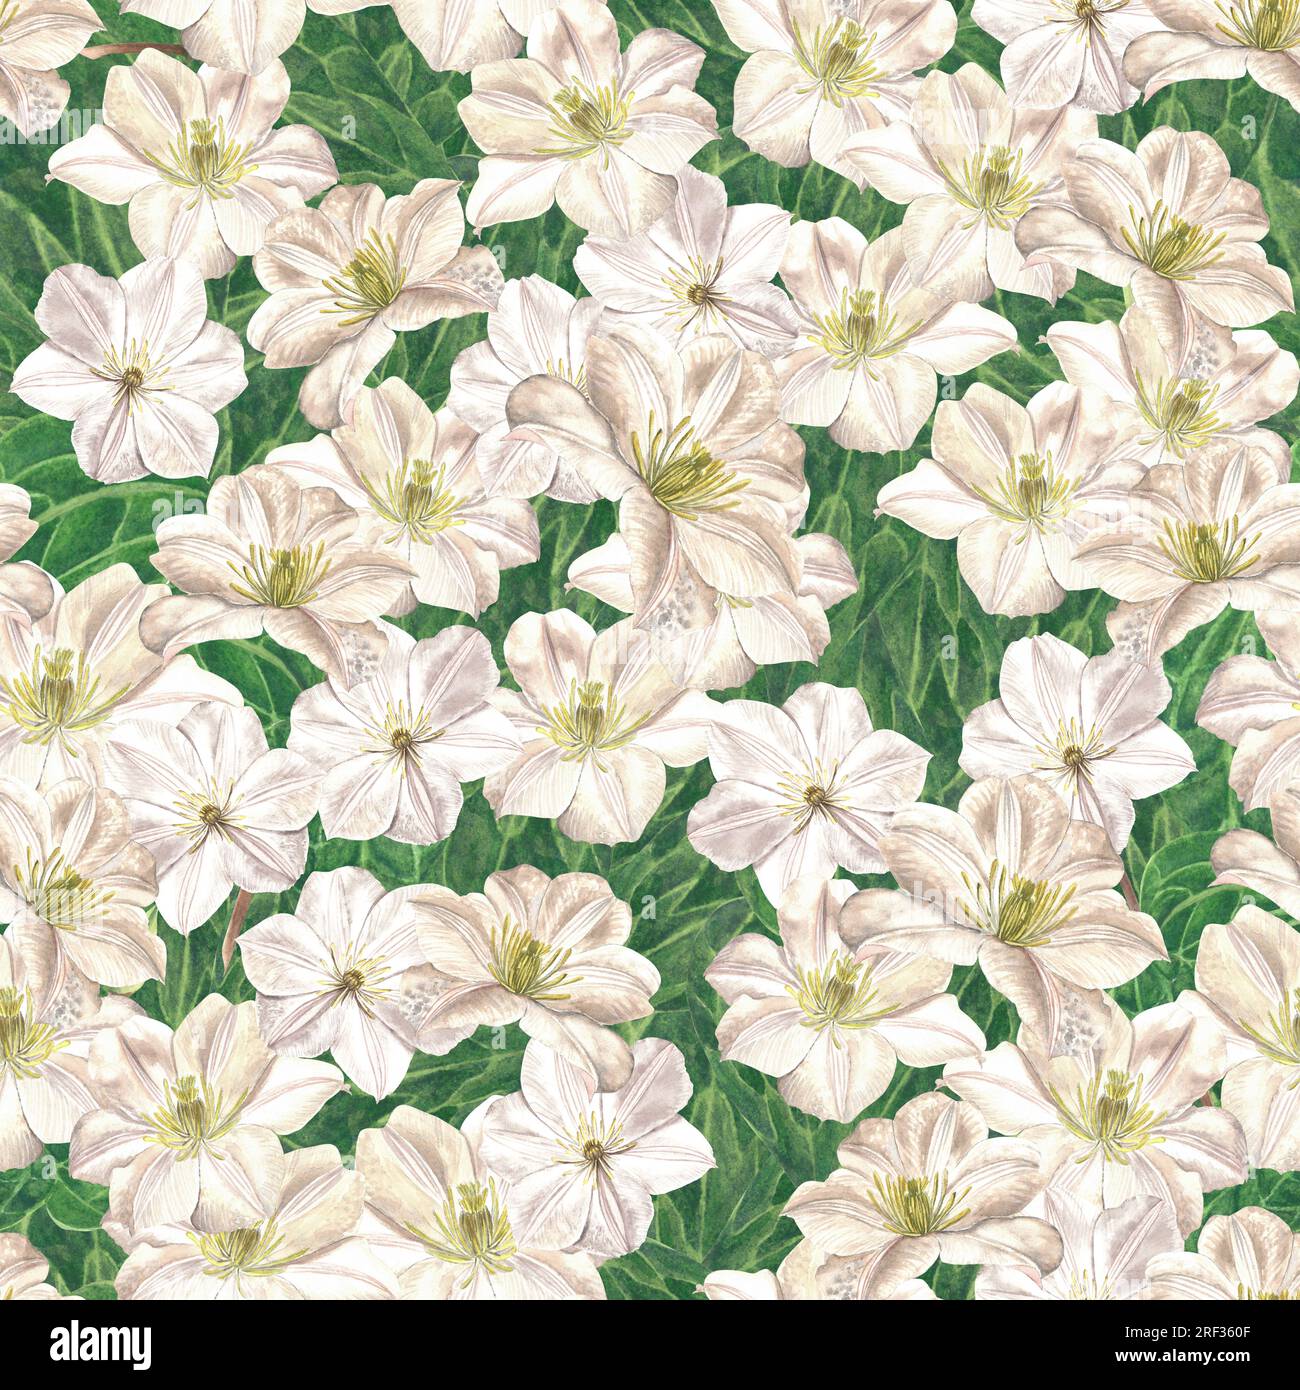 Watercolor illustration of clematis flowers. Seamless dense pattern made by hand Stock Photo